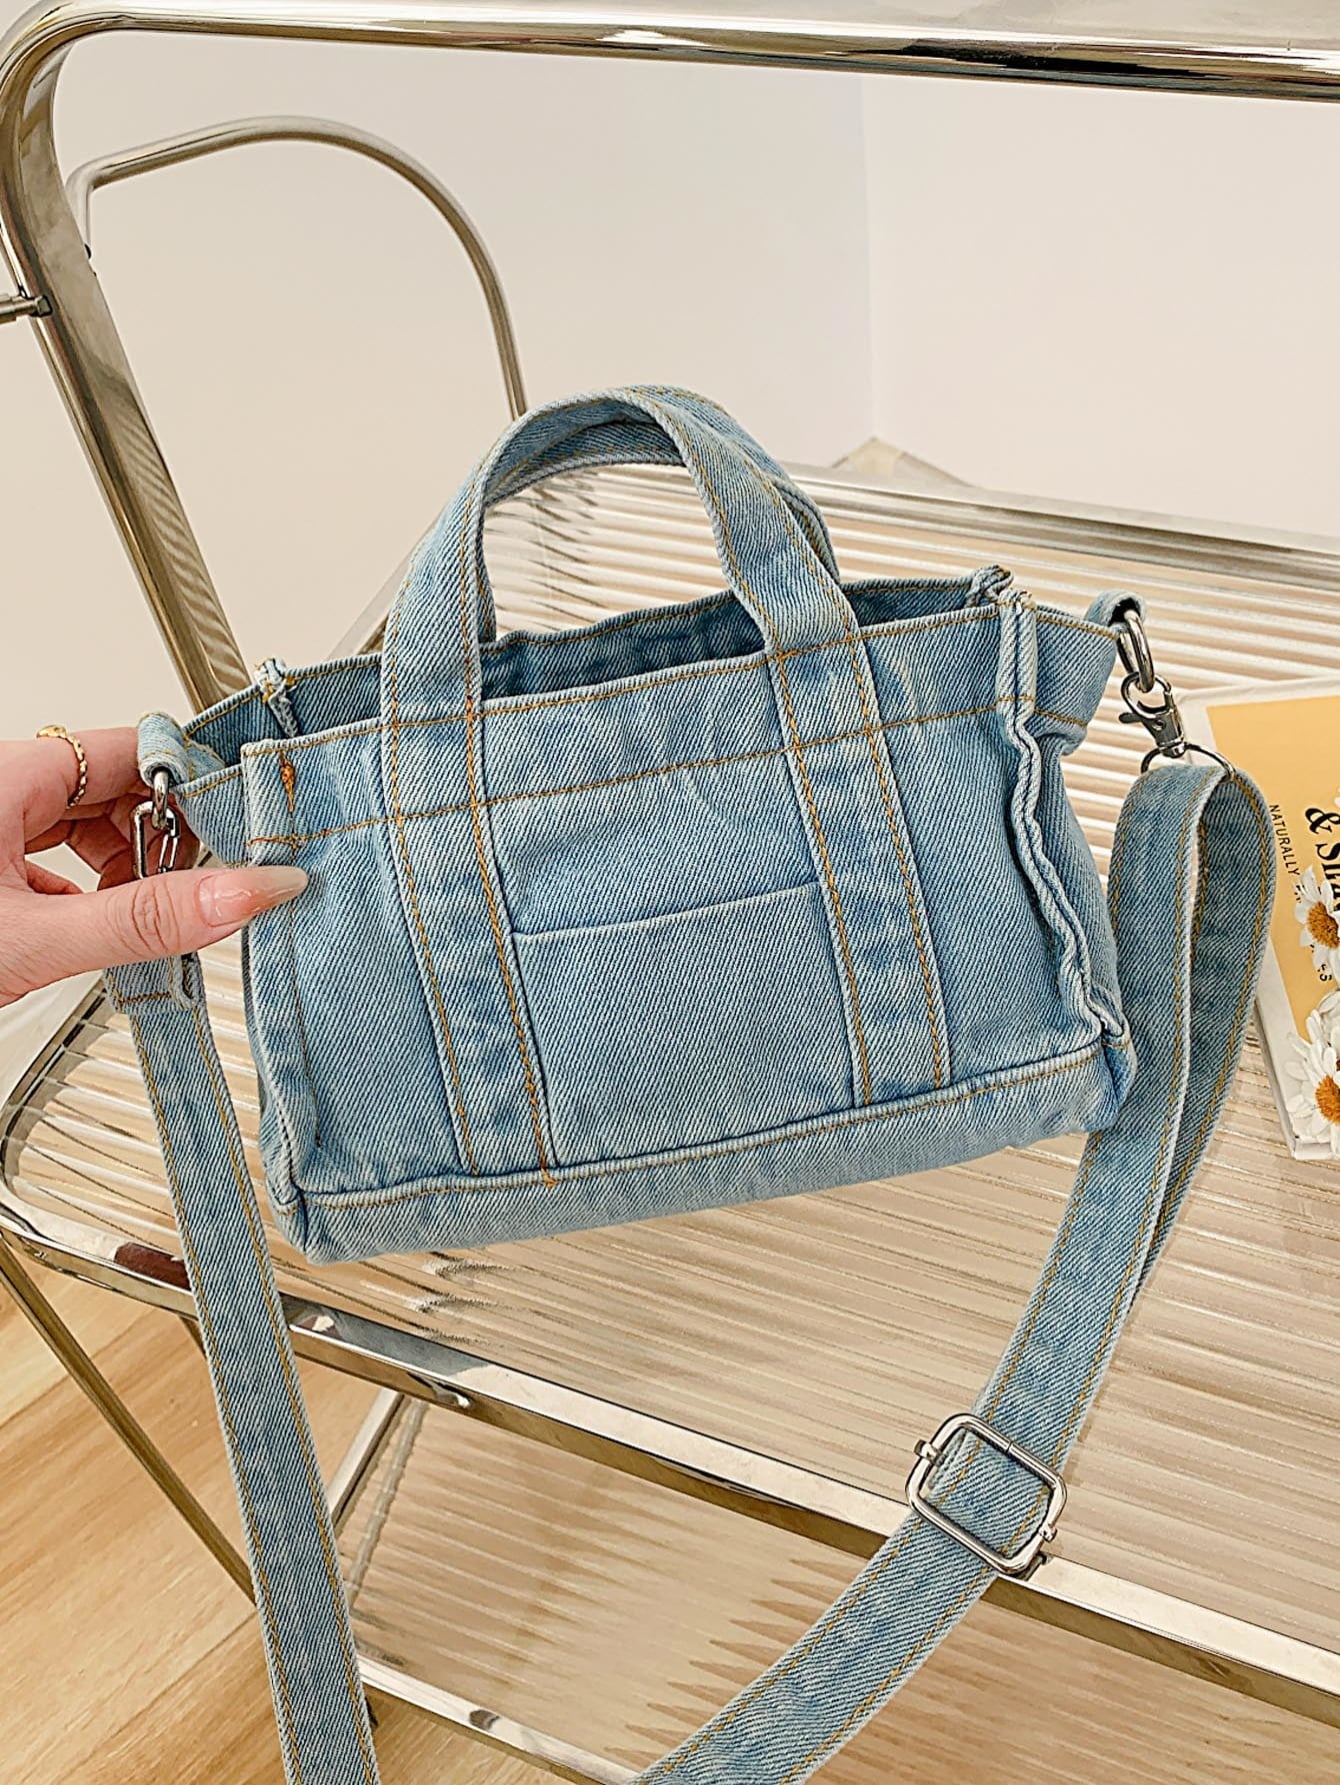 denim shoulder handbag, light blue, held at an angle by a woman's hand, on a glass and metal slatted cart